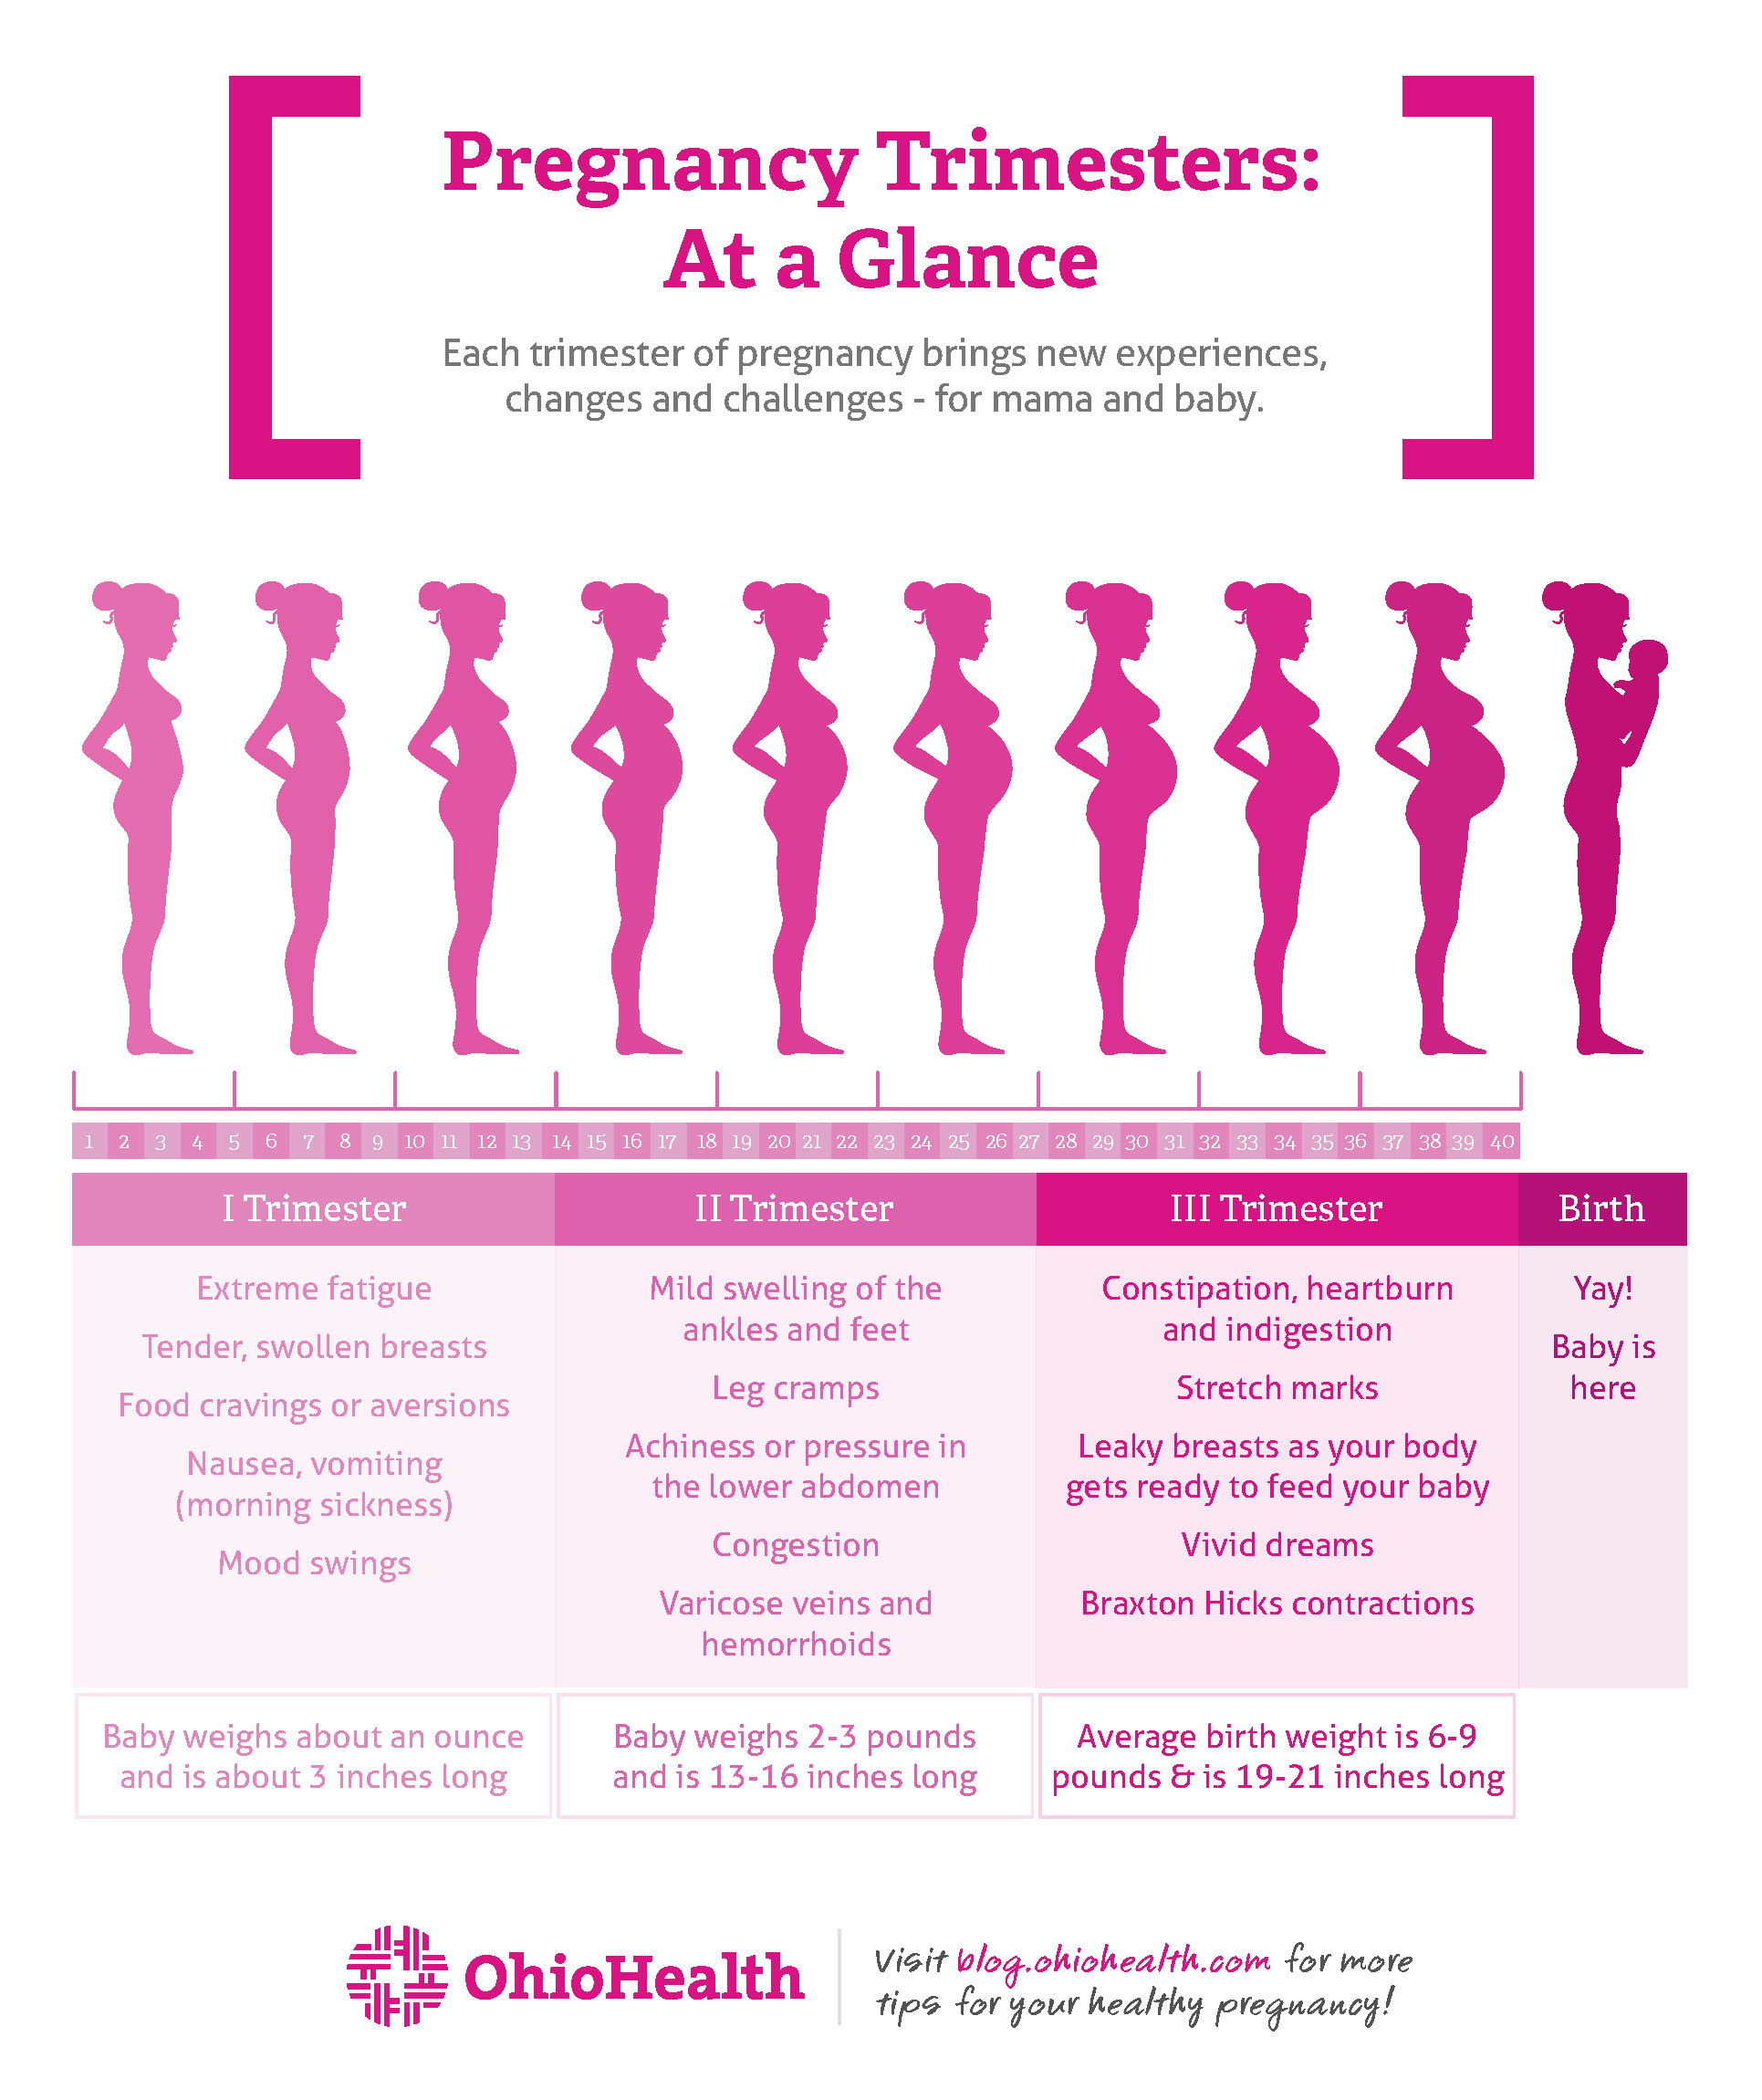 Pregnancy Trimesters: At a Glance